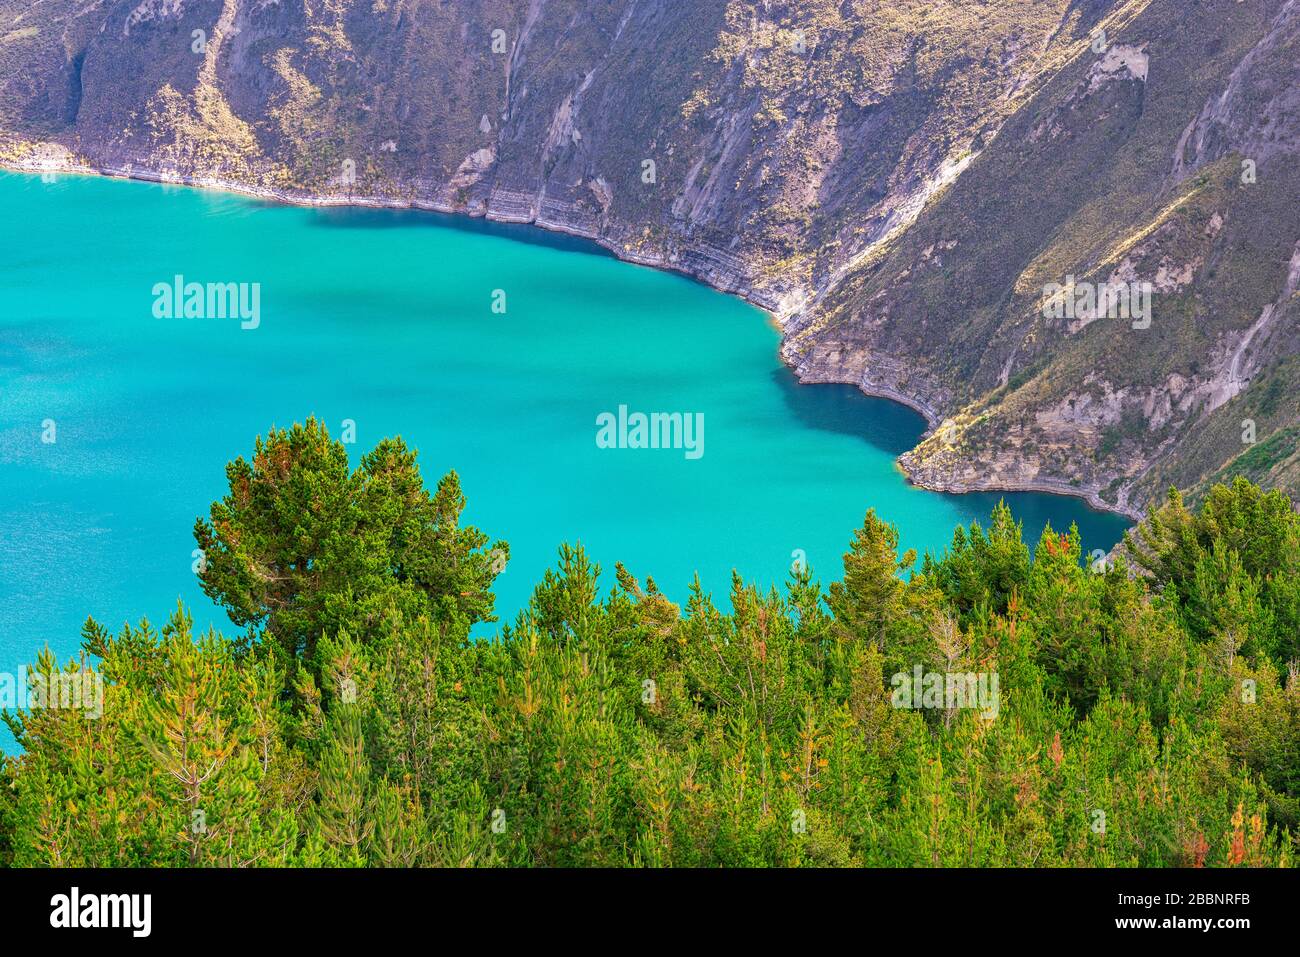 Turquoise waters of the Quilotoa crater lake with pine trees in the foreground, South of Quito, Ecuador. Stock Photo